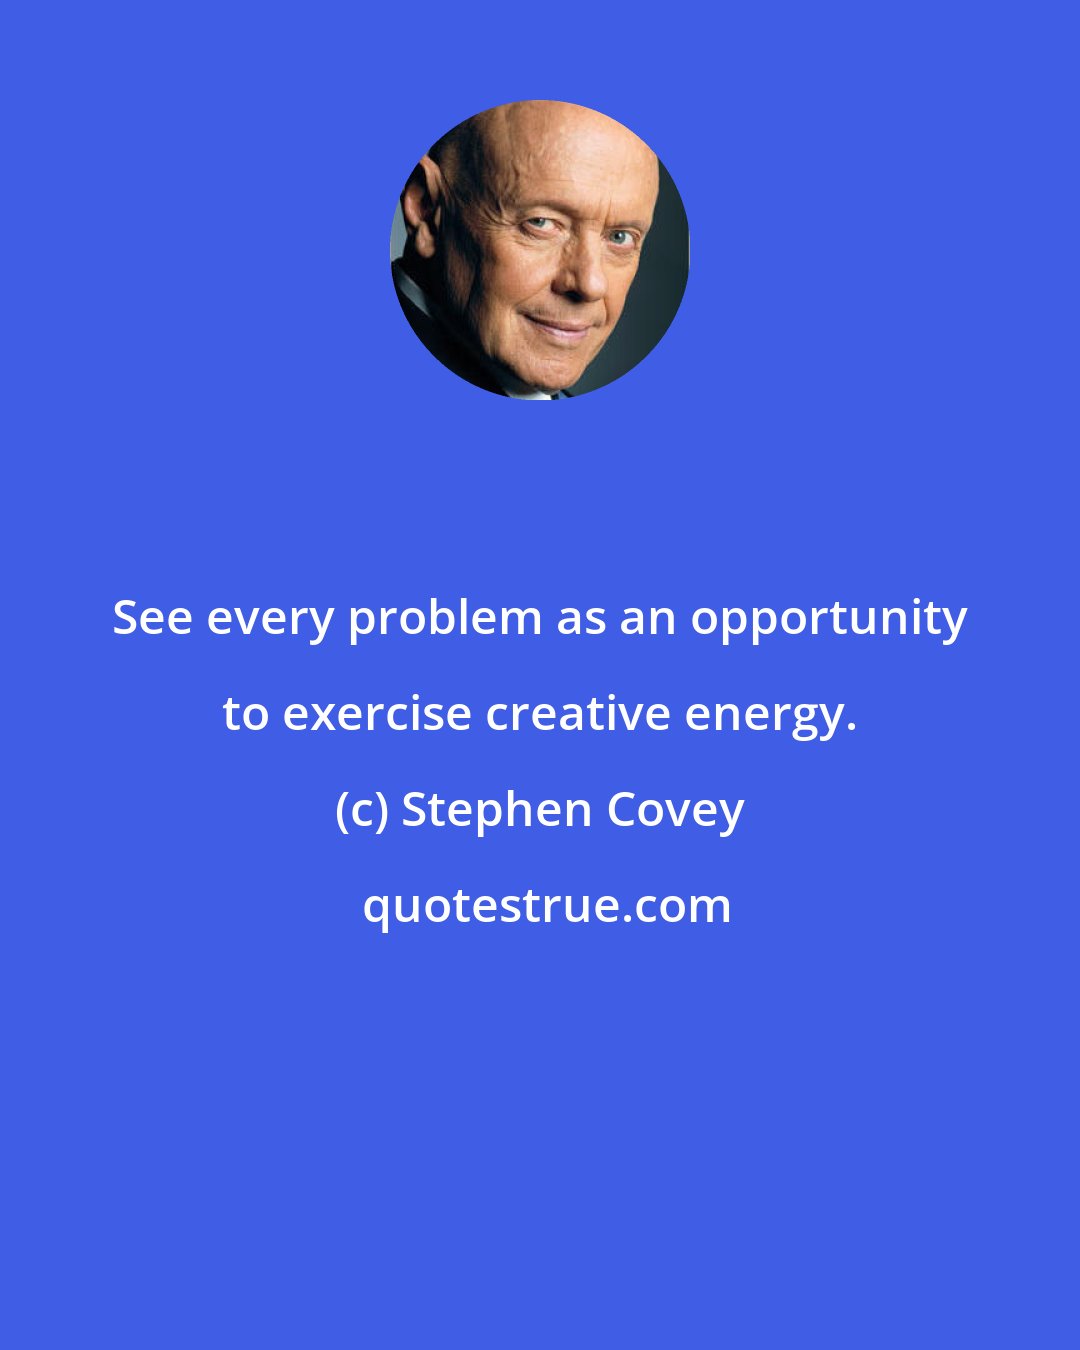 Stephen Covey: See every problem as an opportunity to exercise creative energy.